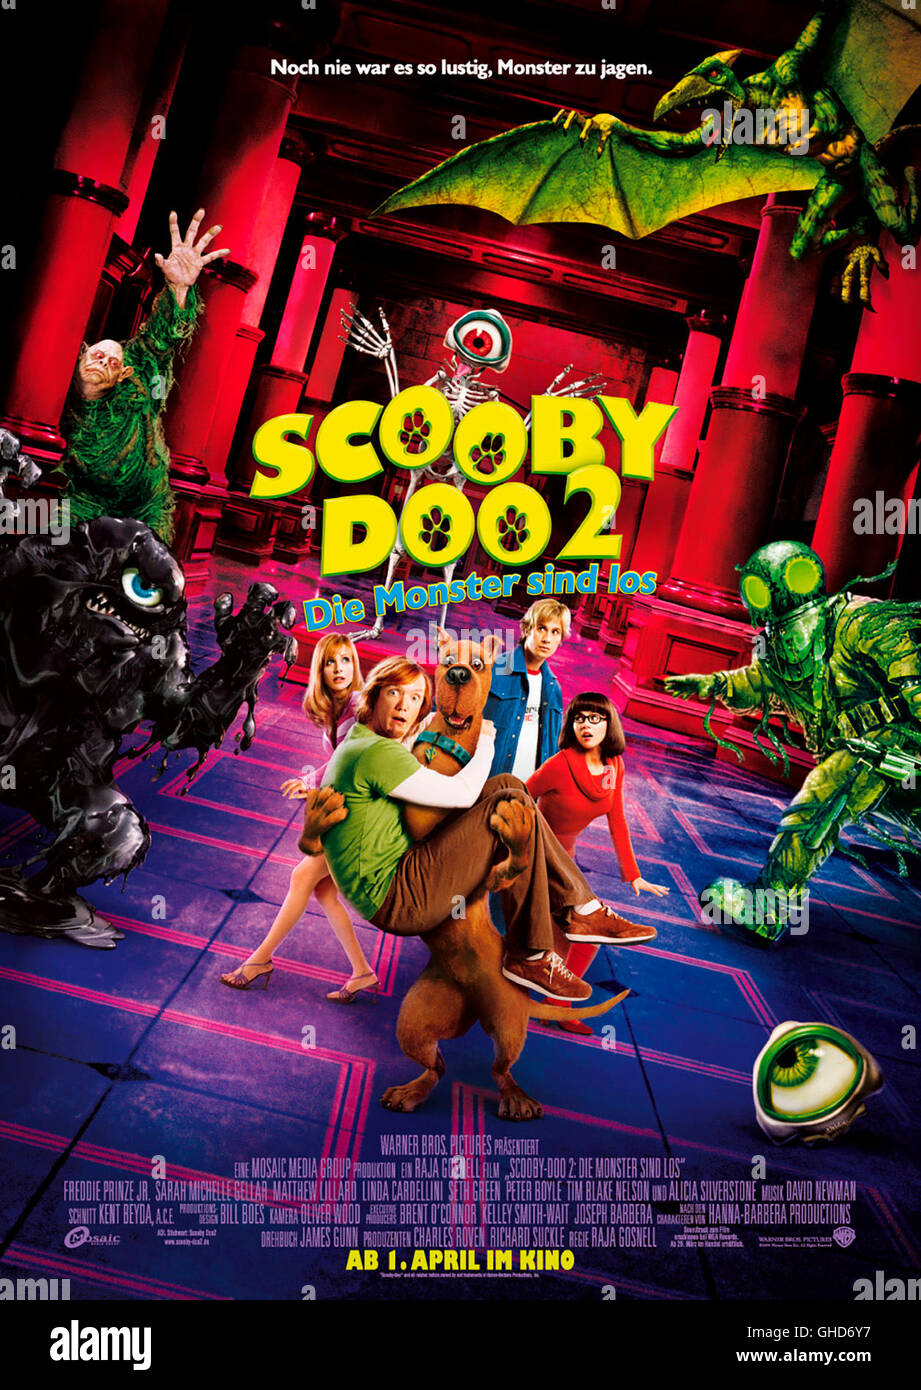 scooby doo 2 monsters unleashed game